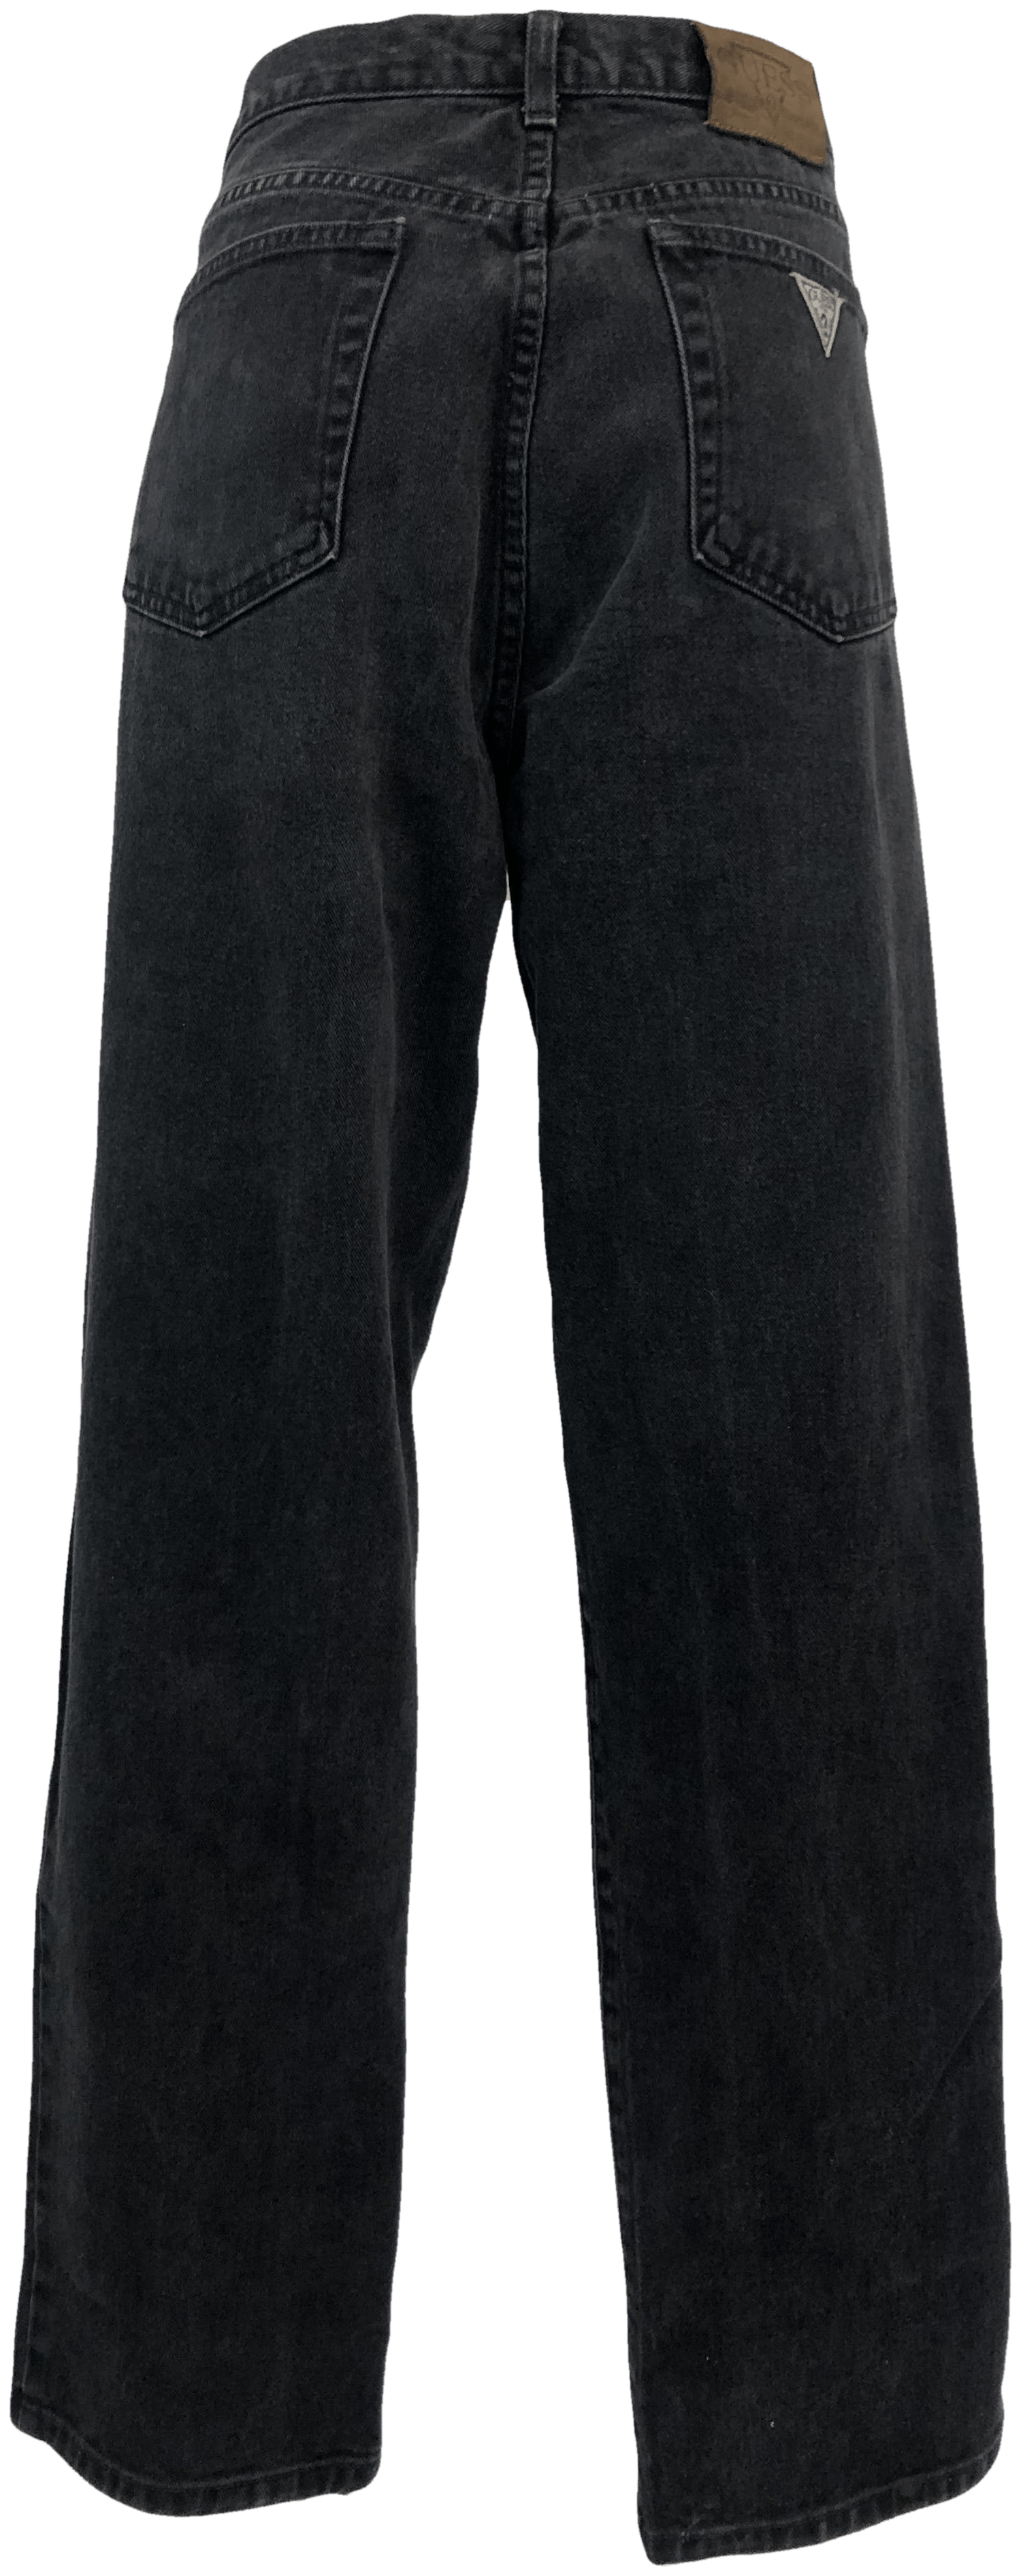 Vintage 80's High Rise Faded Black Jeans by Guess | Shop THRILLING